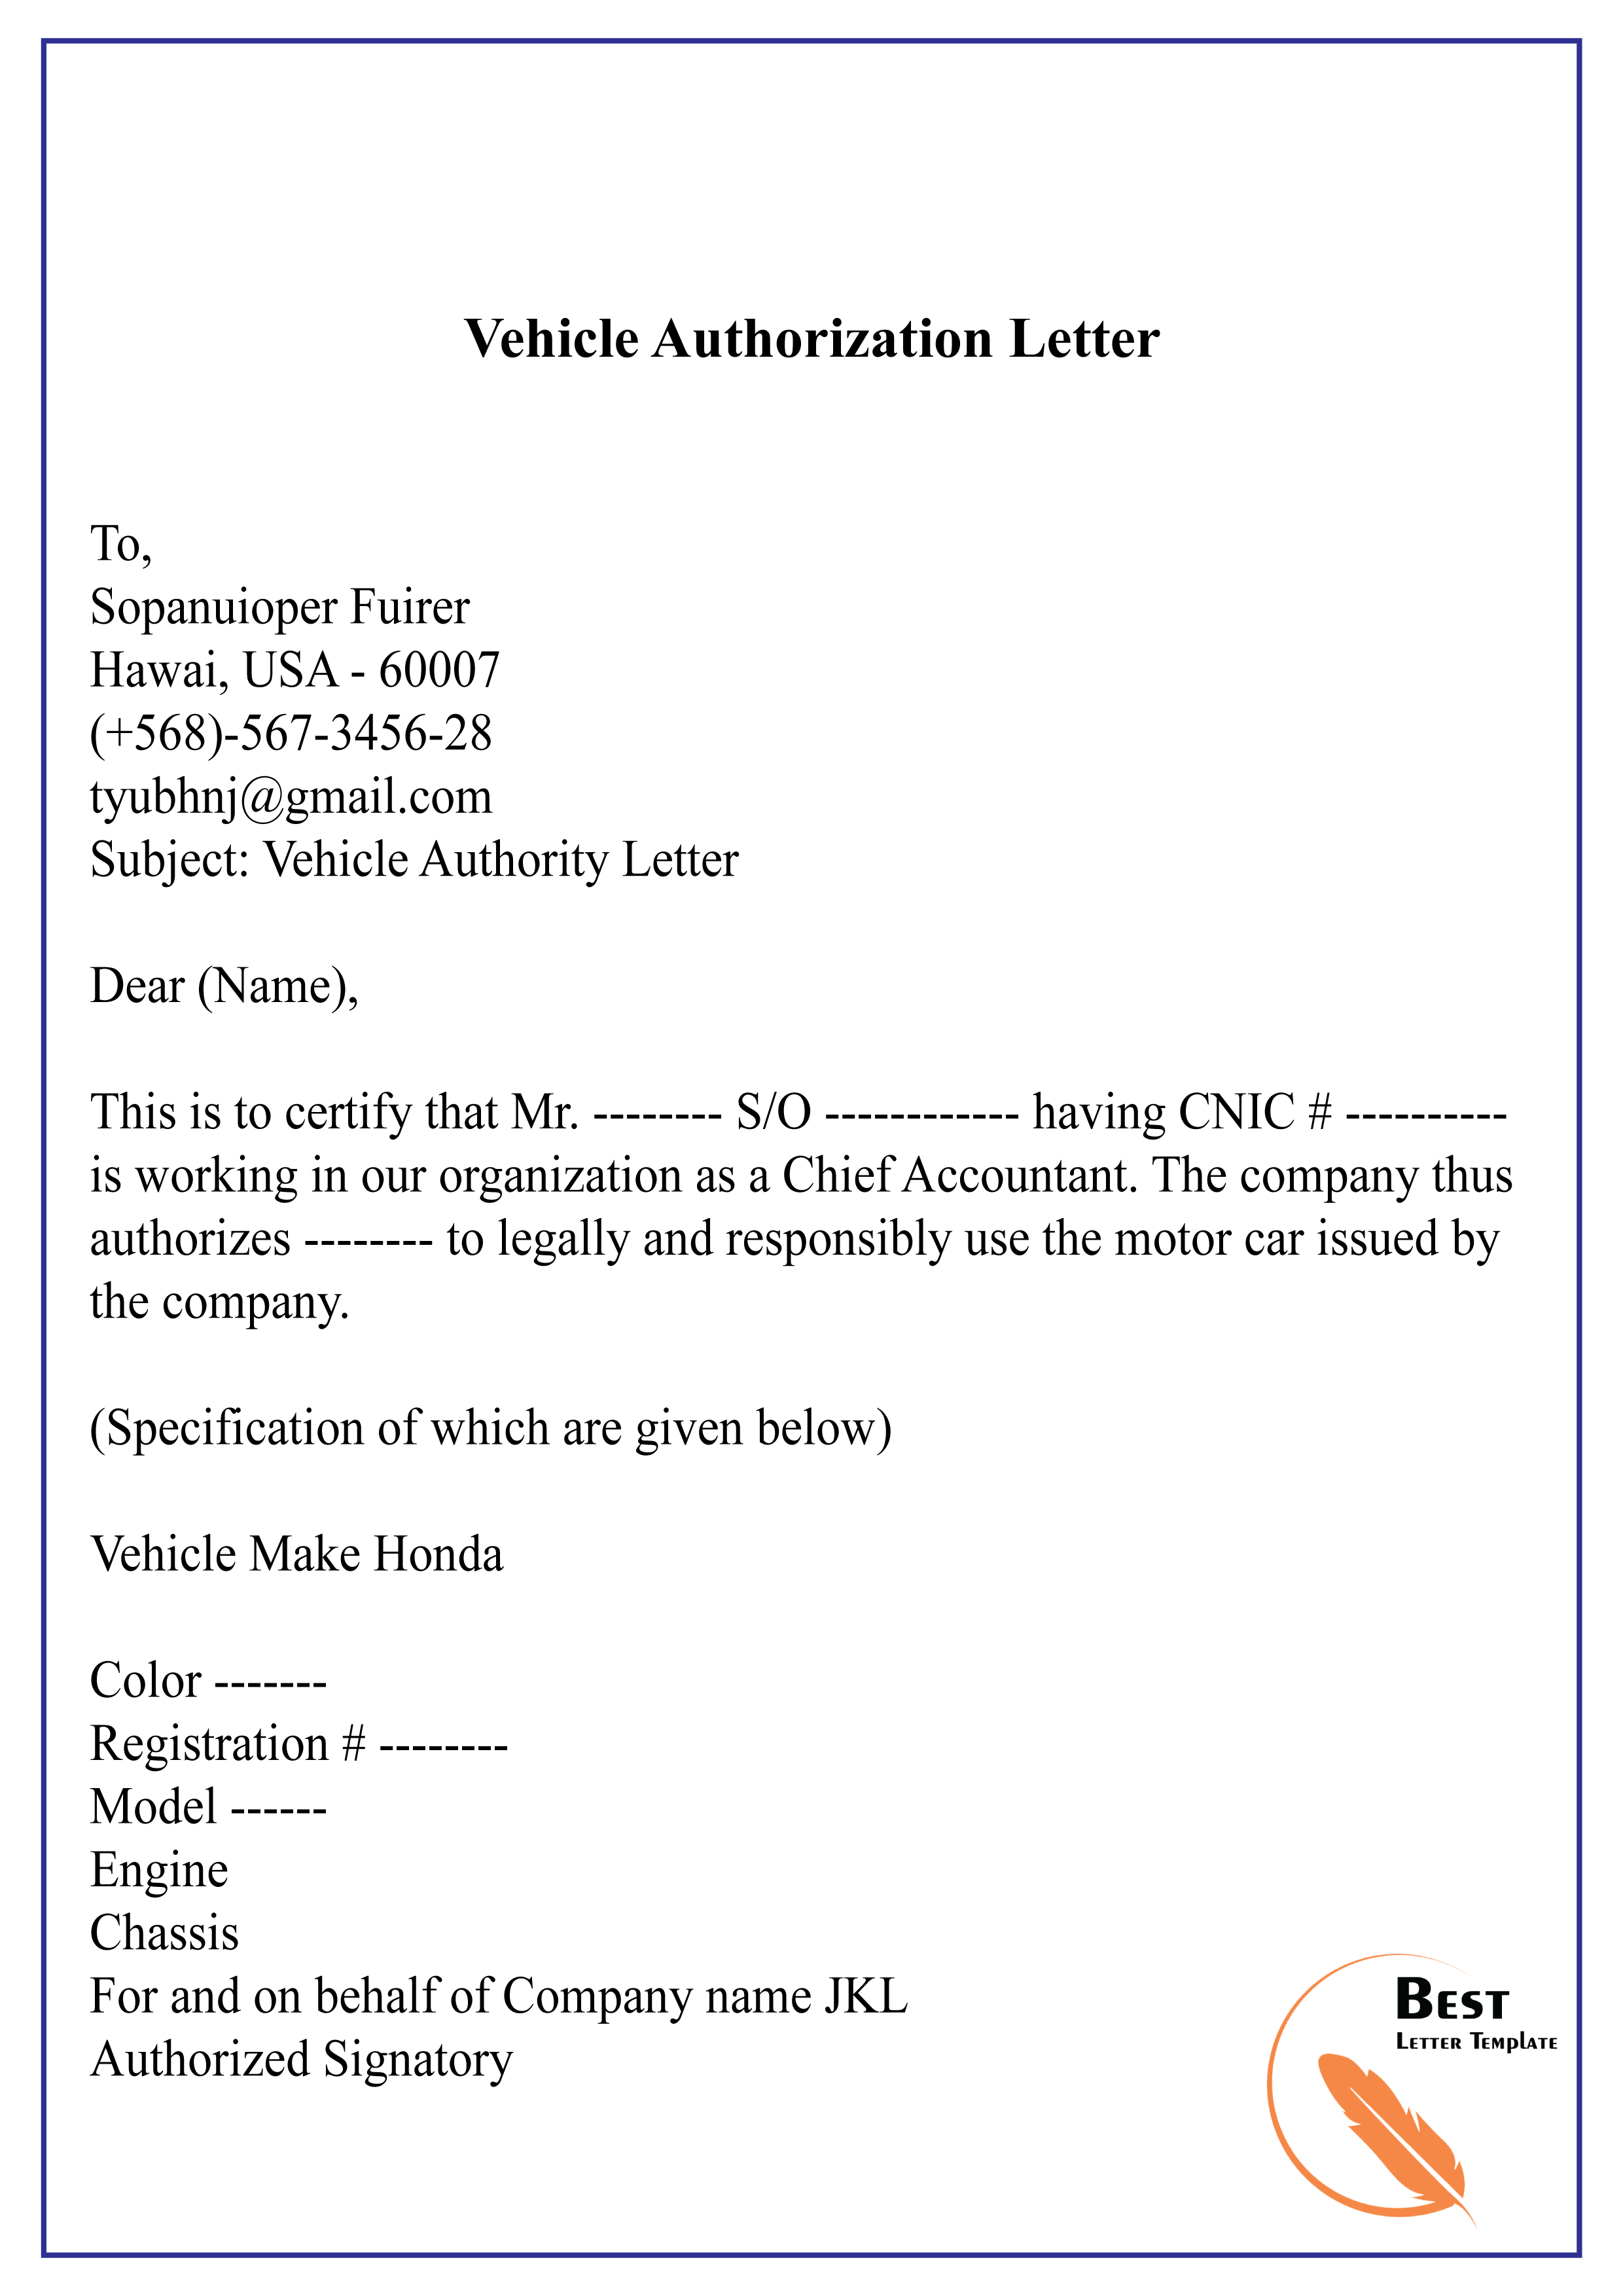 Vehicle Authorization Letter 01 Best Letter Template